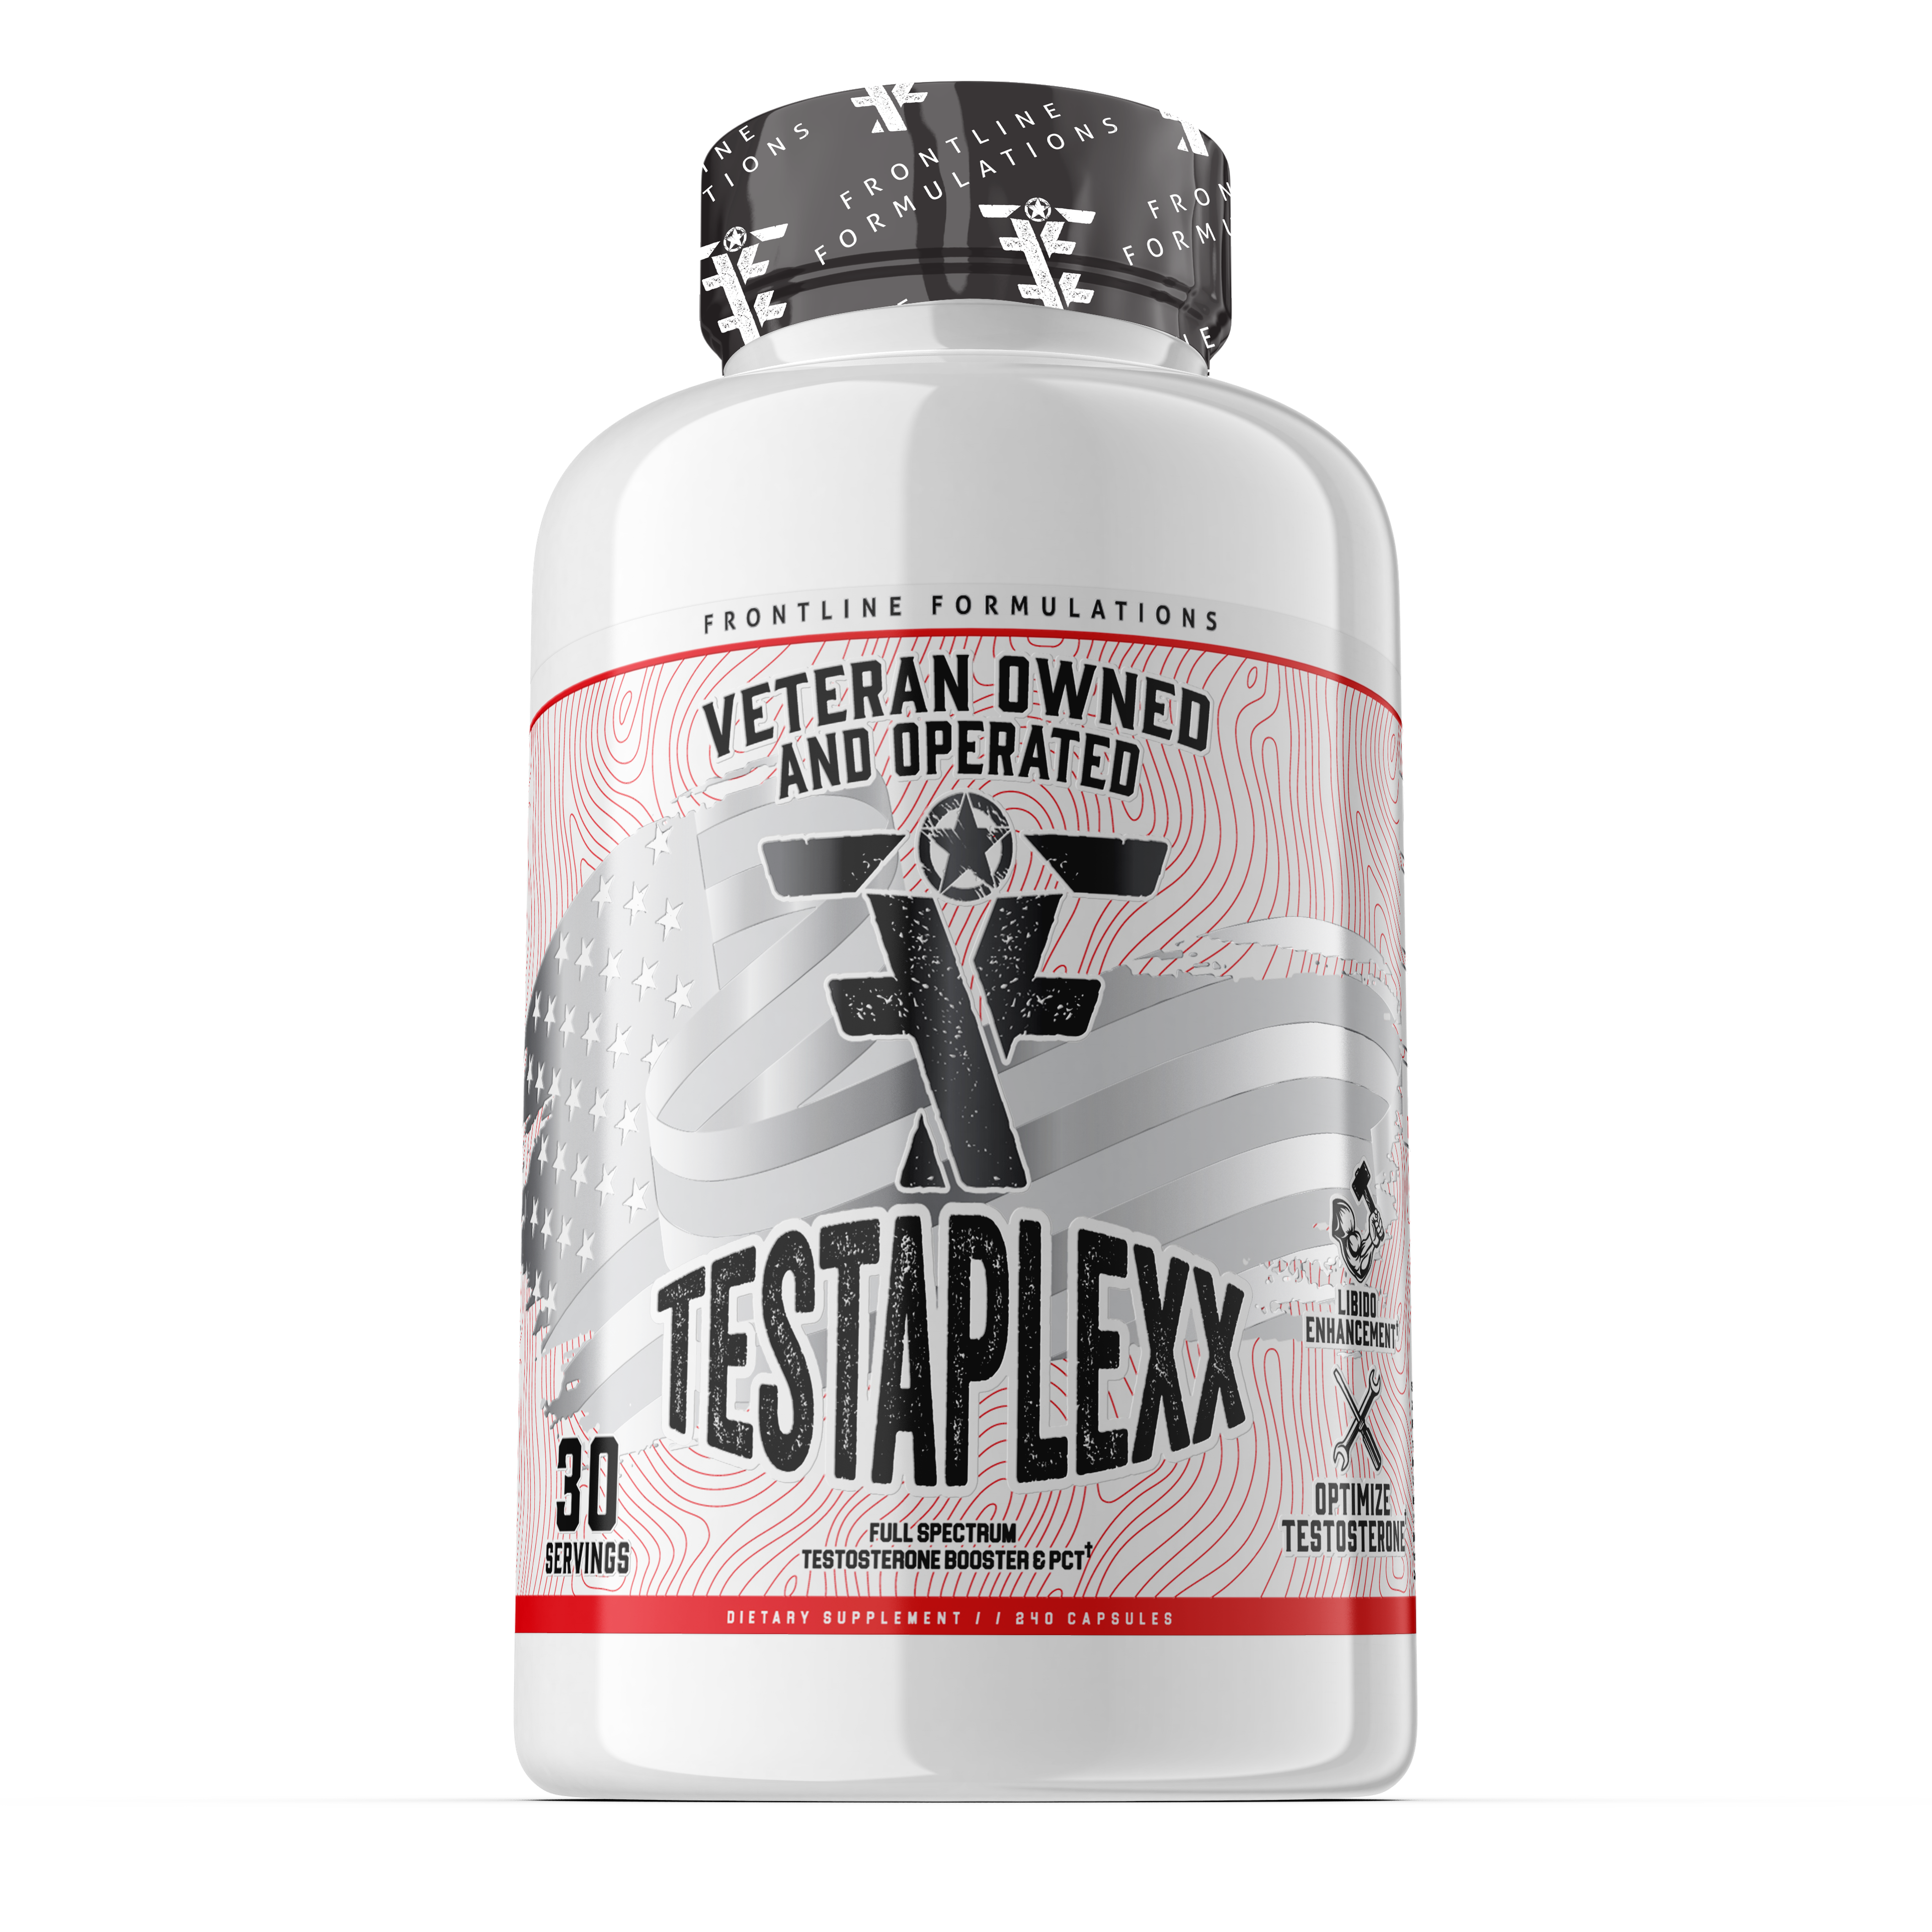 Testaplexx - NEW & Improved Formula Look and feel like a man! The king of blends of ingredients for men's health. There isn't an avenue that Testaplexx hasn't covered! Increasing testosterone isn't easy but when libido, prostate, cholesterol, liver, kidne